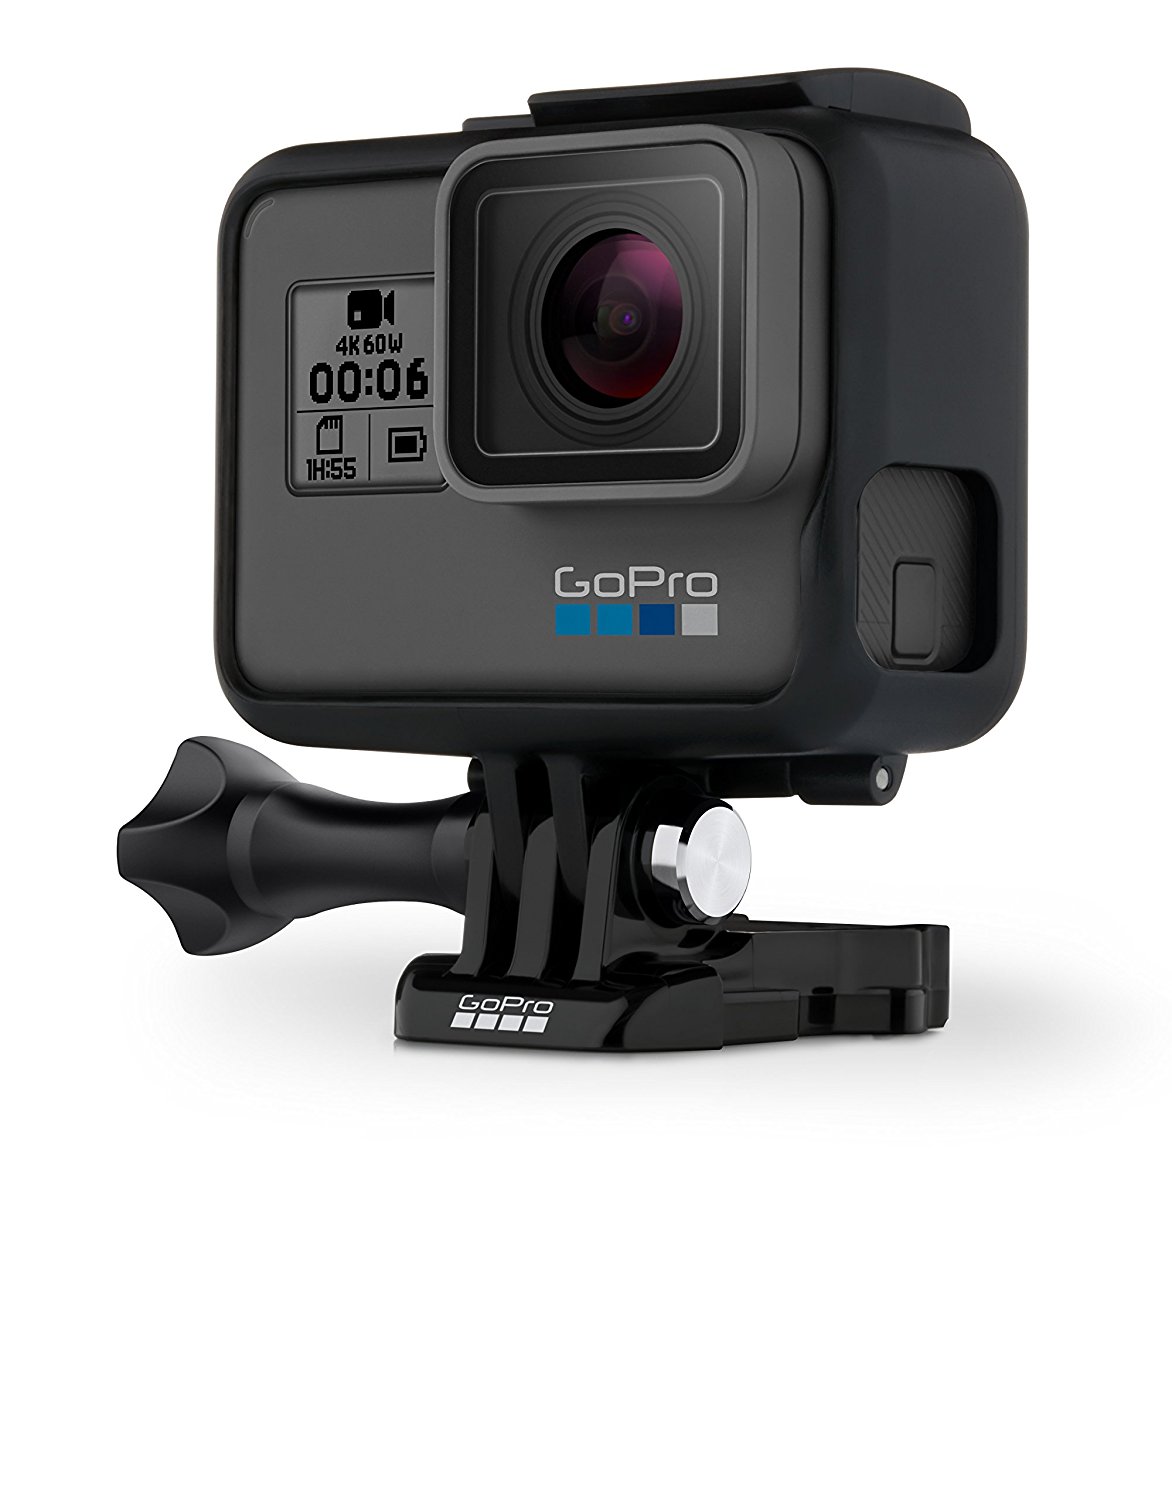 The Best GoPro HERO Action Cameras With Deals and Promo Discount June 2018